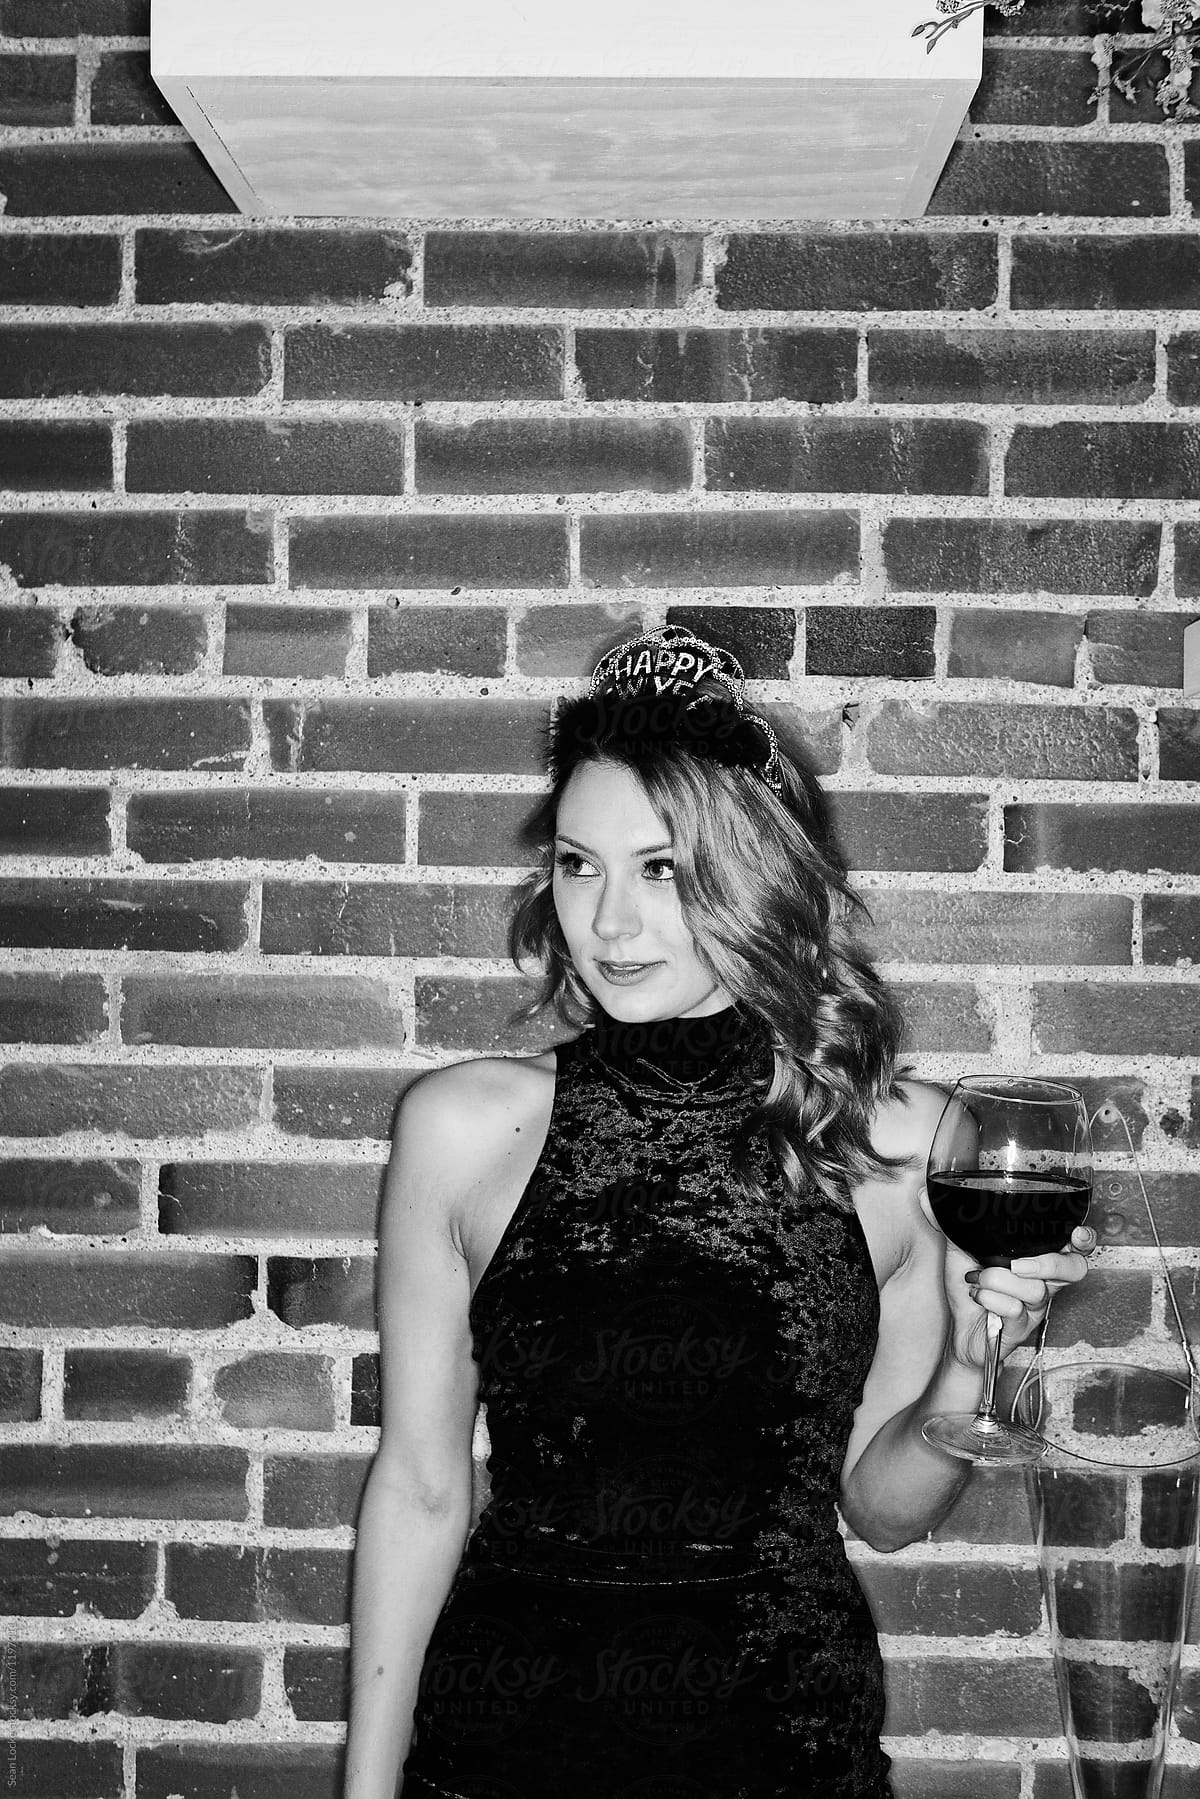 NYE: Woman Stands At Party With Wine Glass